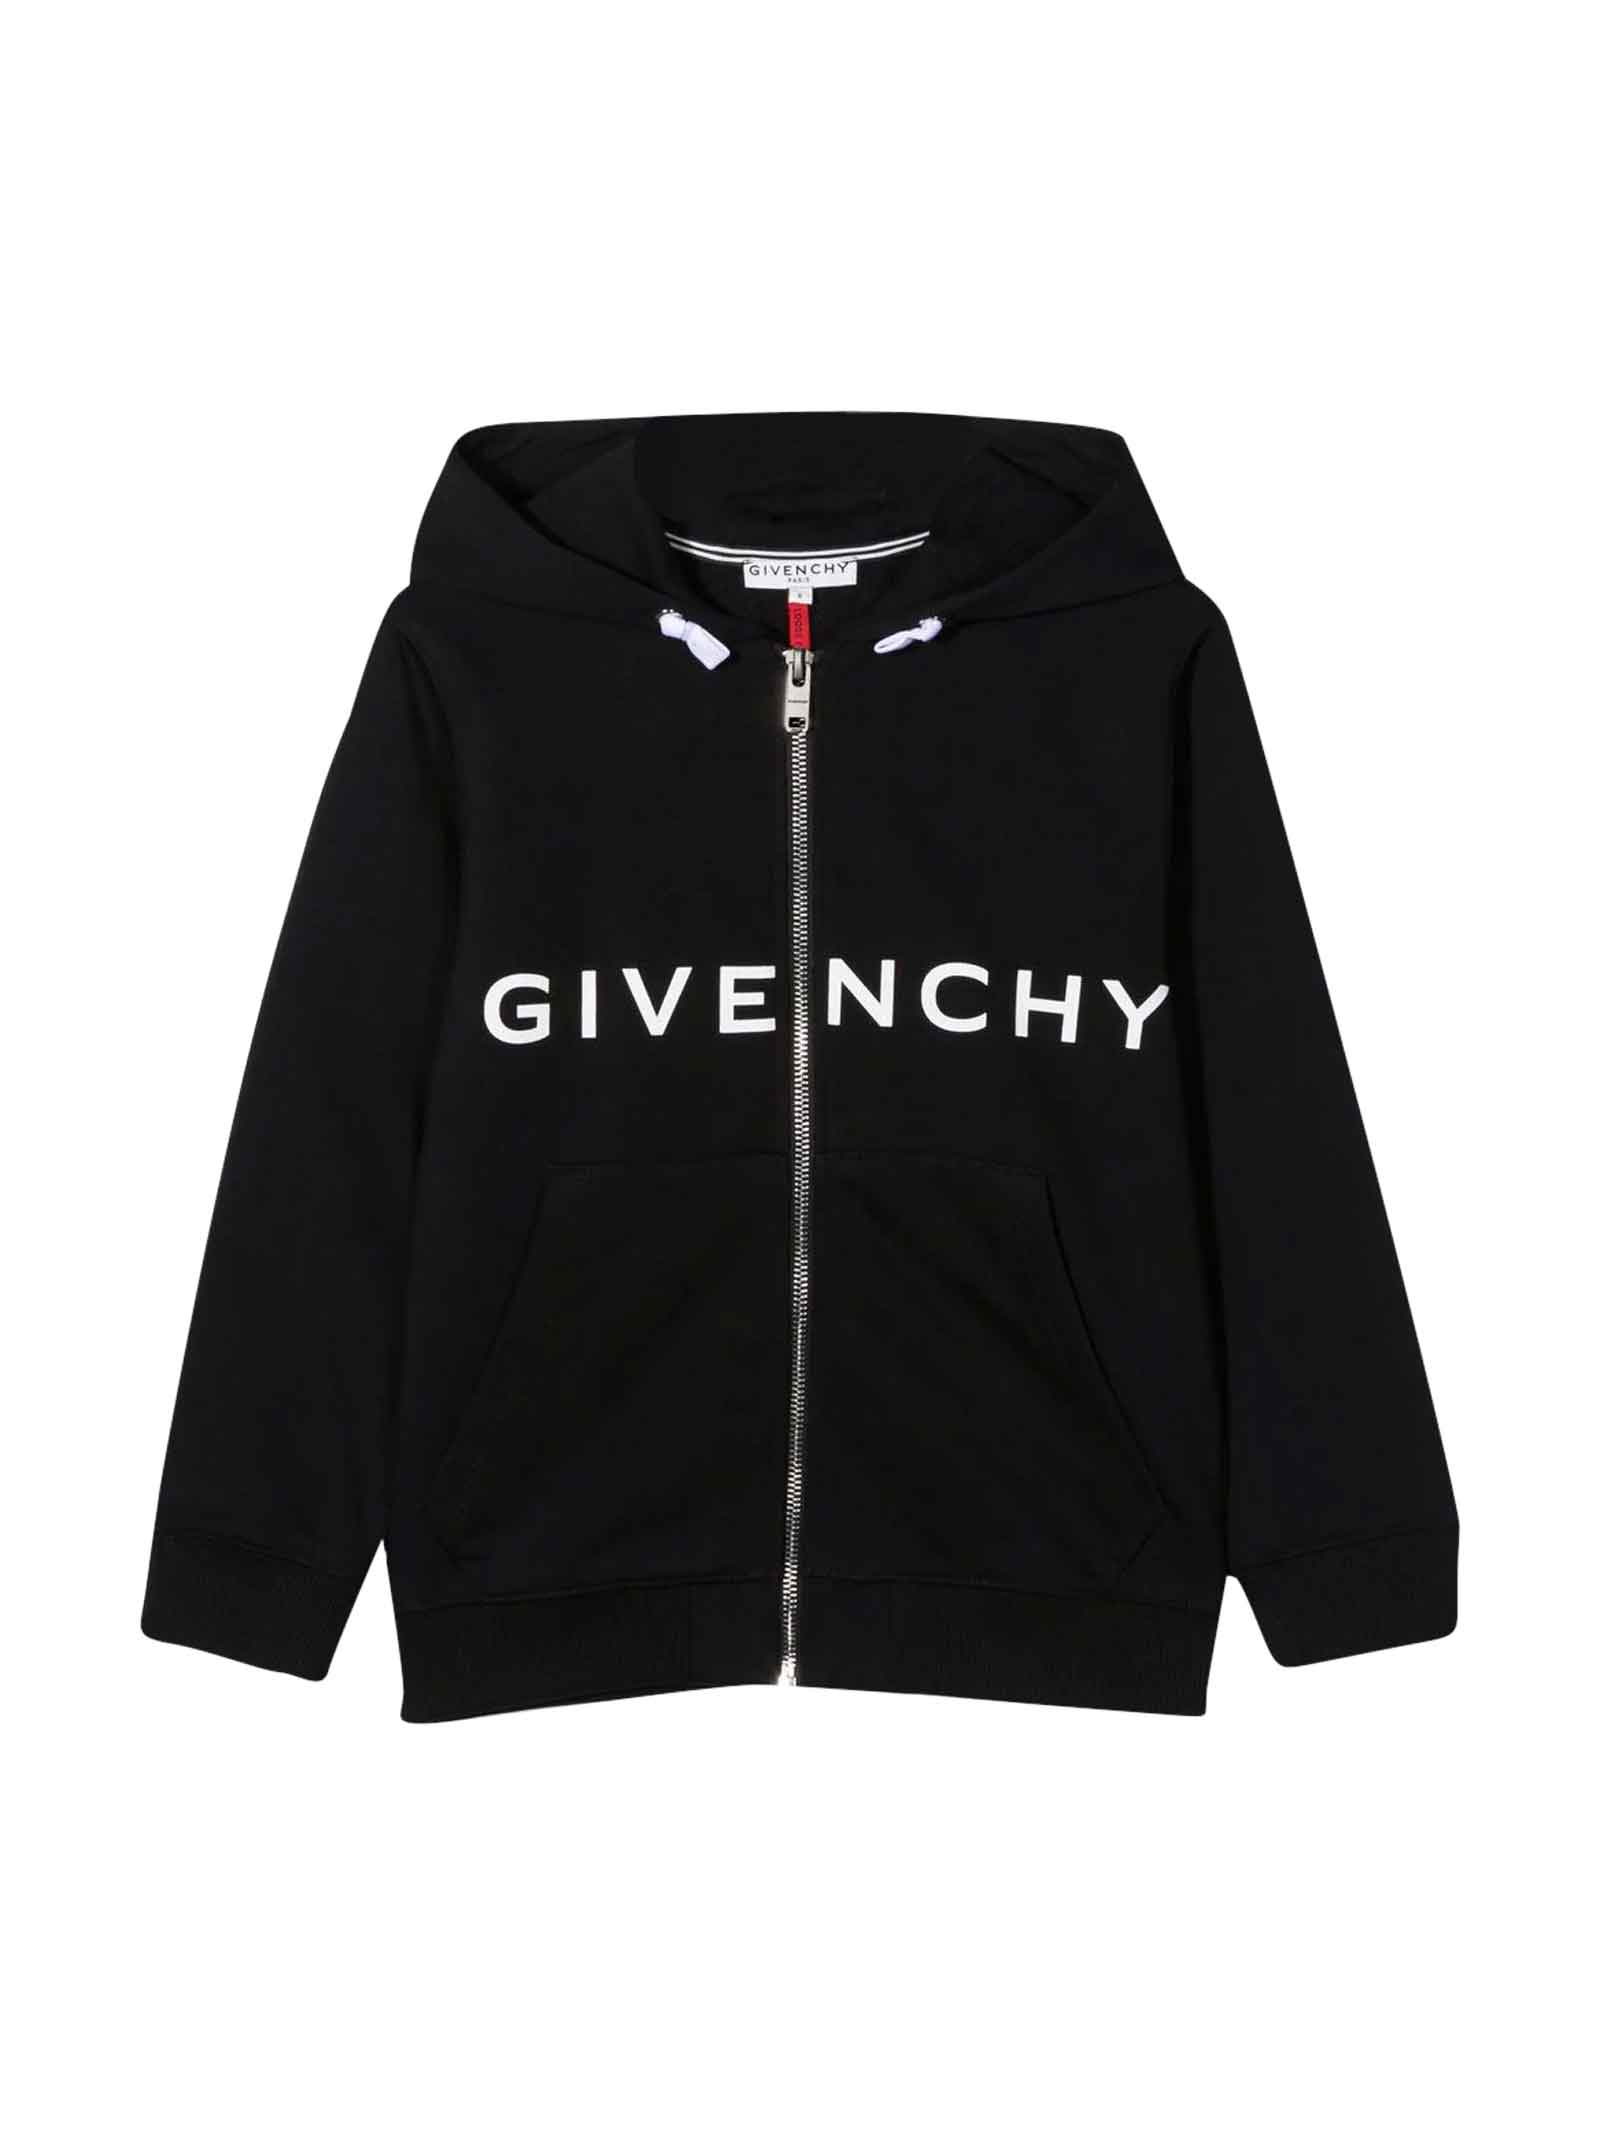 Givenchy Black Sweatshirt With Zip, Hood And White Logo